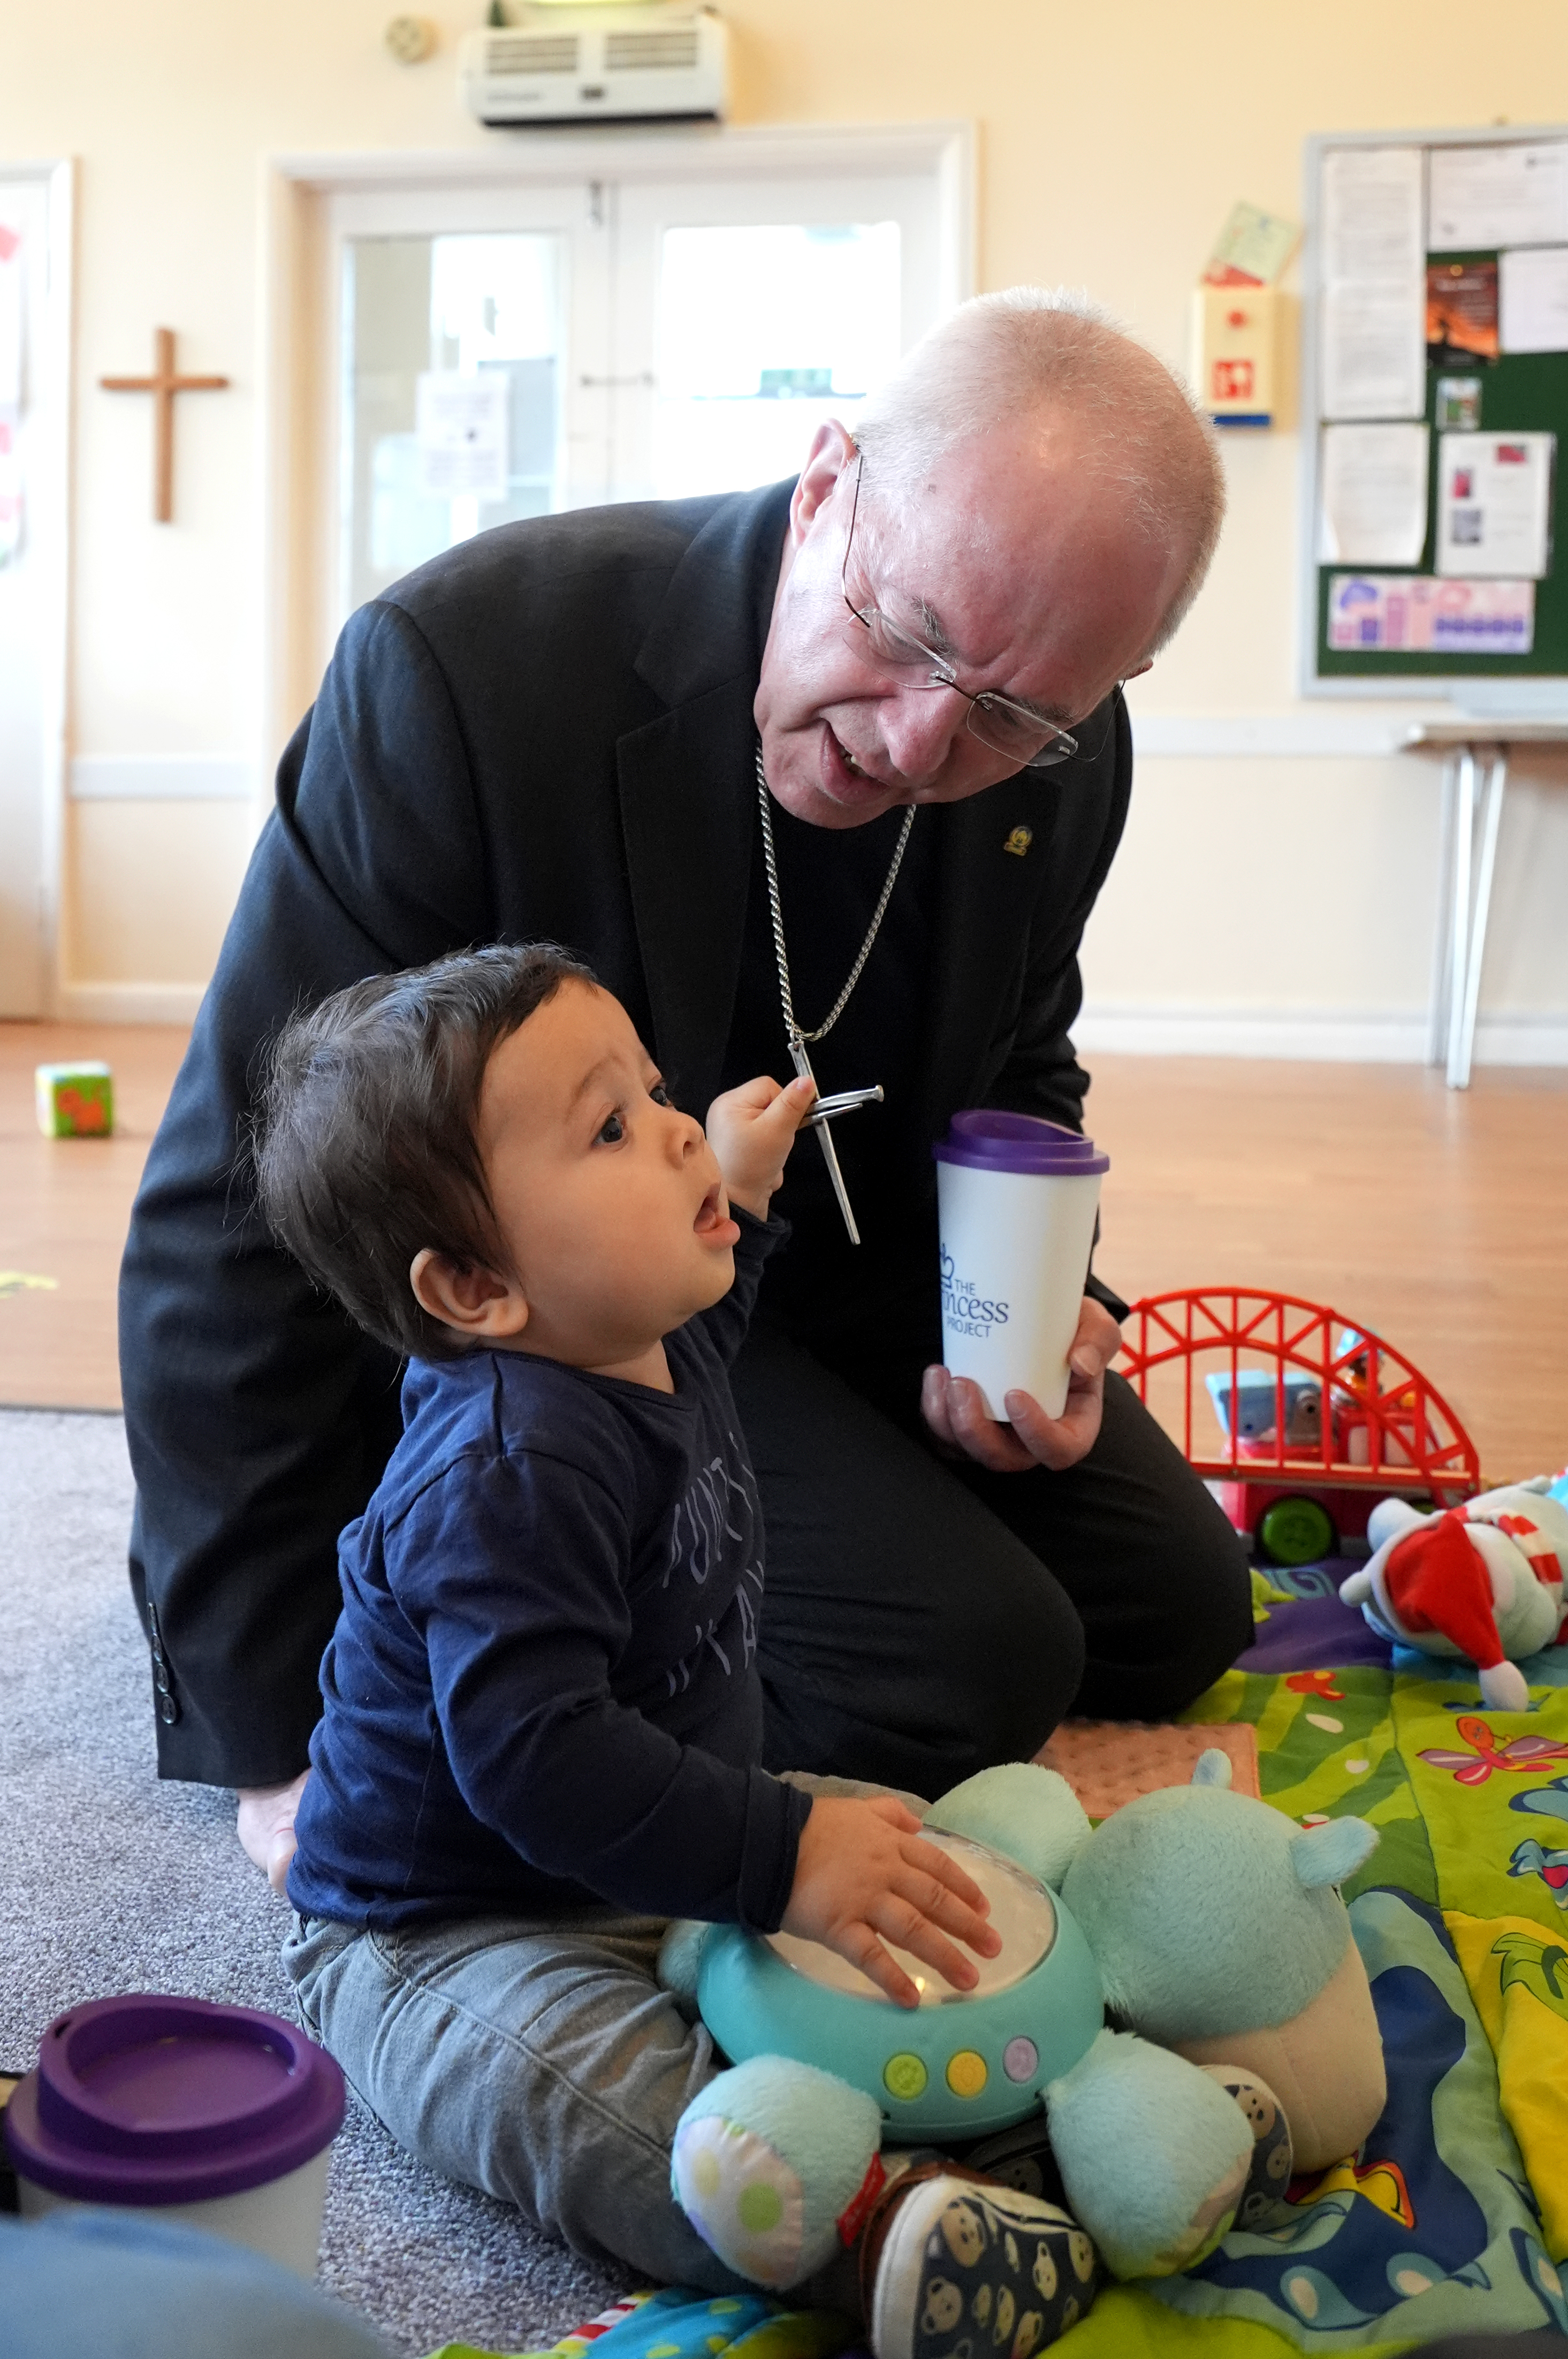 The Archbishop of Canterbury, Justin Welby, met young mothers and their children during a visit to the Princess Project in Maidstone, Kent